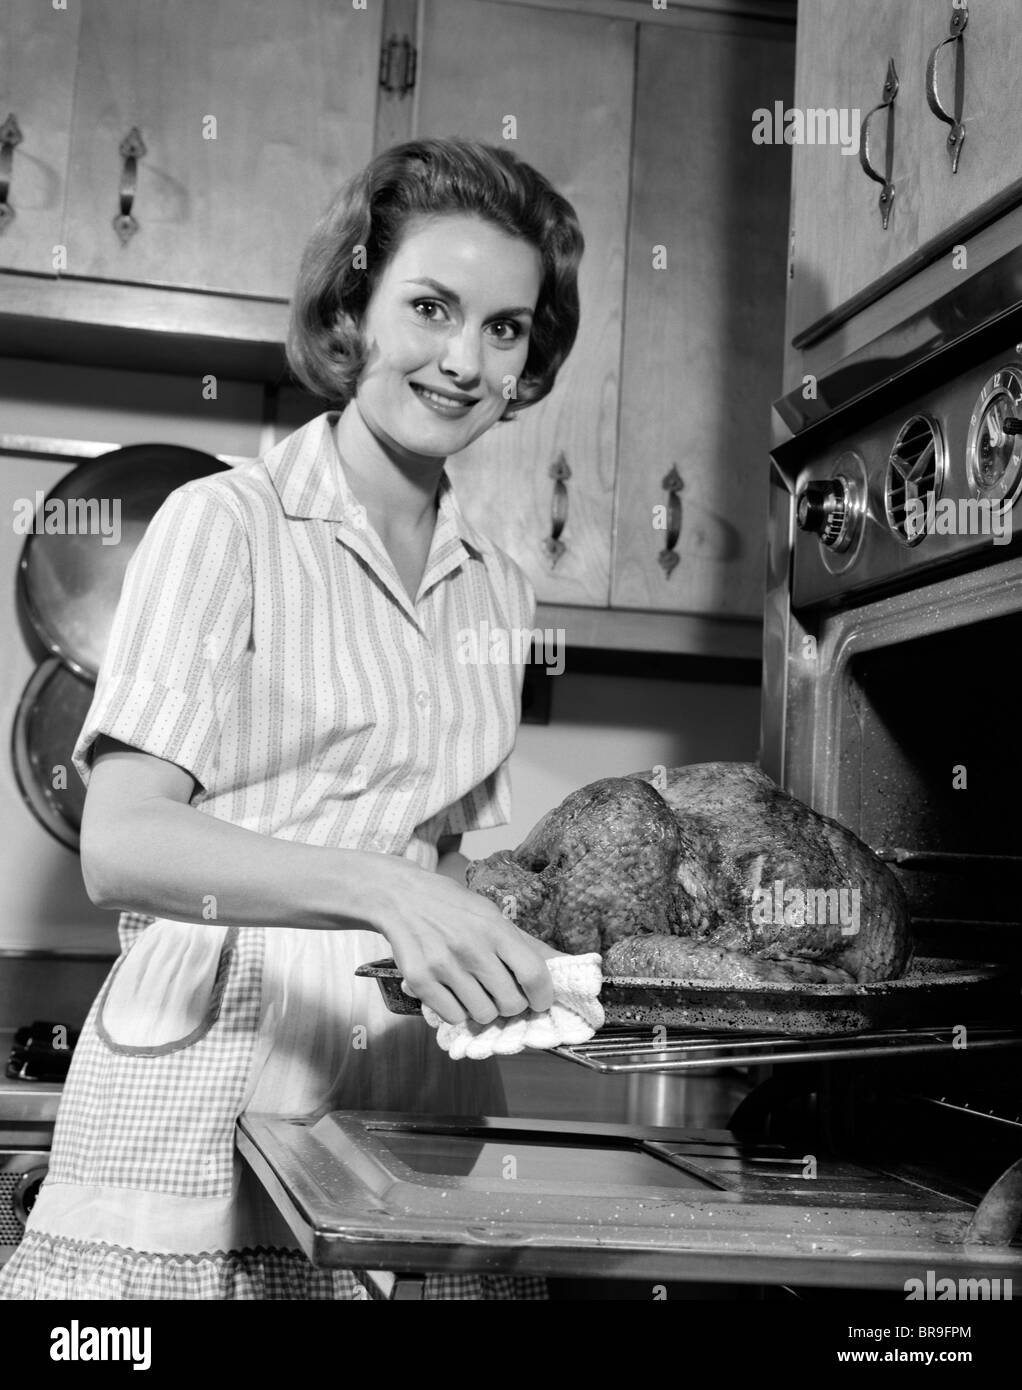 1960s SMILING HOUSEWIFE REMOVING THANKSGIVING ROAST TURKEY FROM OVEN LOOKING AT CAMERA Stock Photo